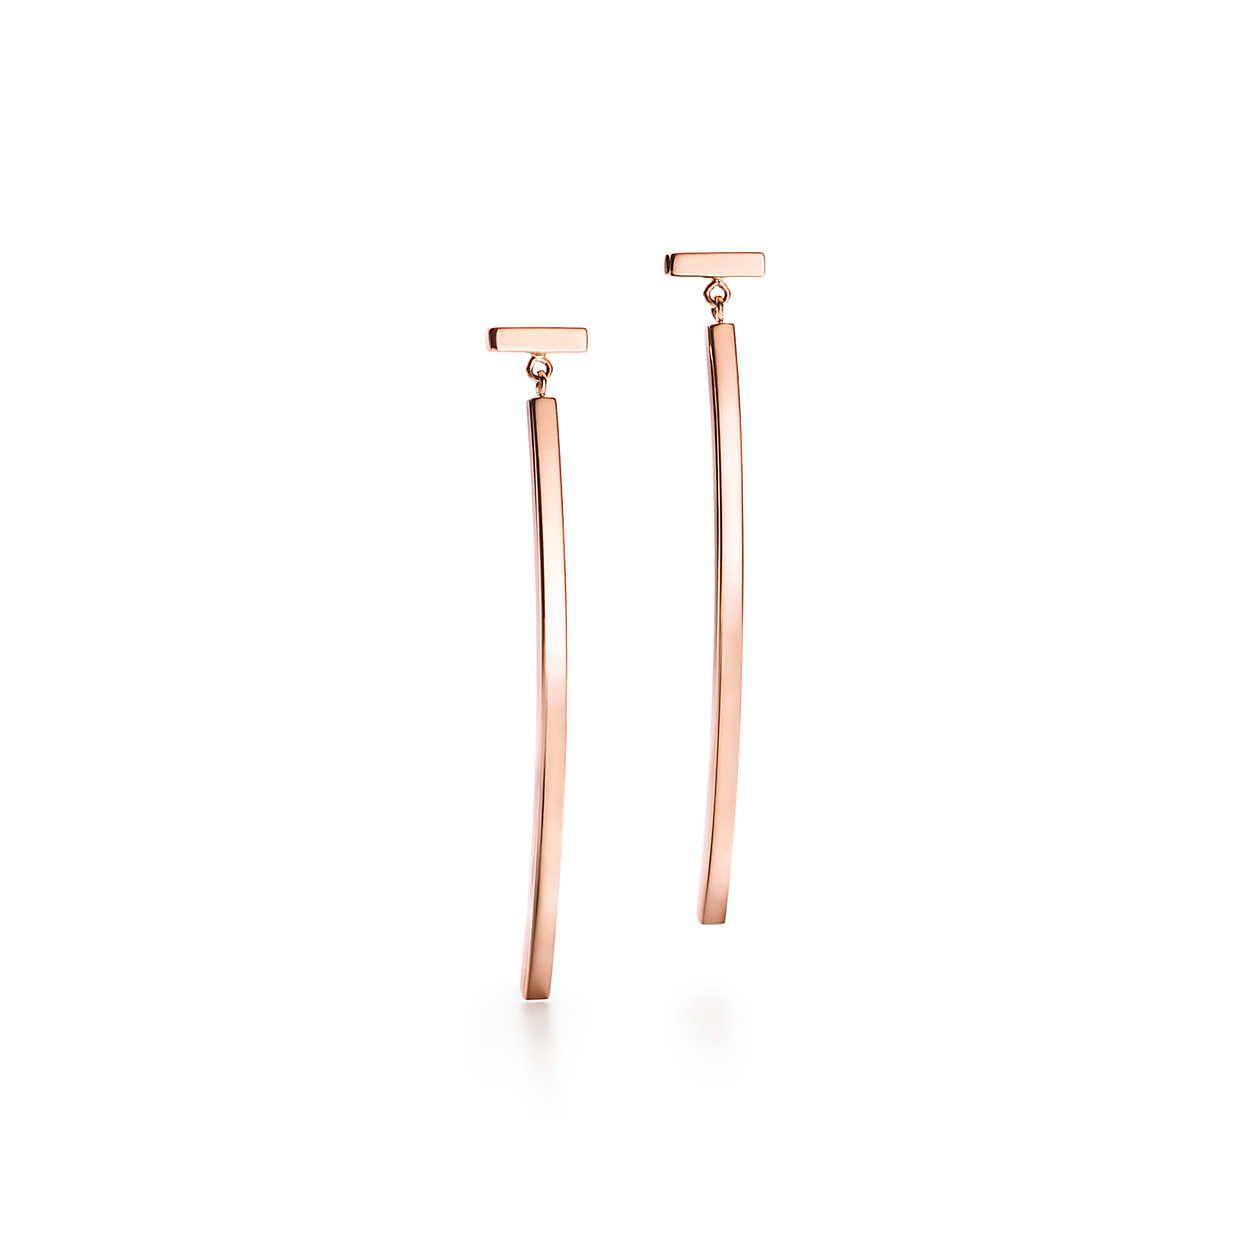 Tiffany and Co Logo - Tiffany T wire bar earrings in 18ct rose gold. | Tiffany & Co.